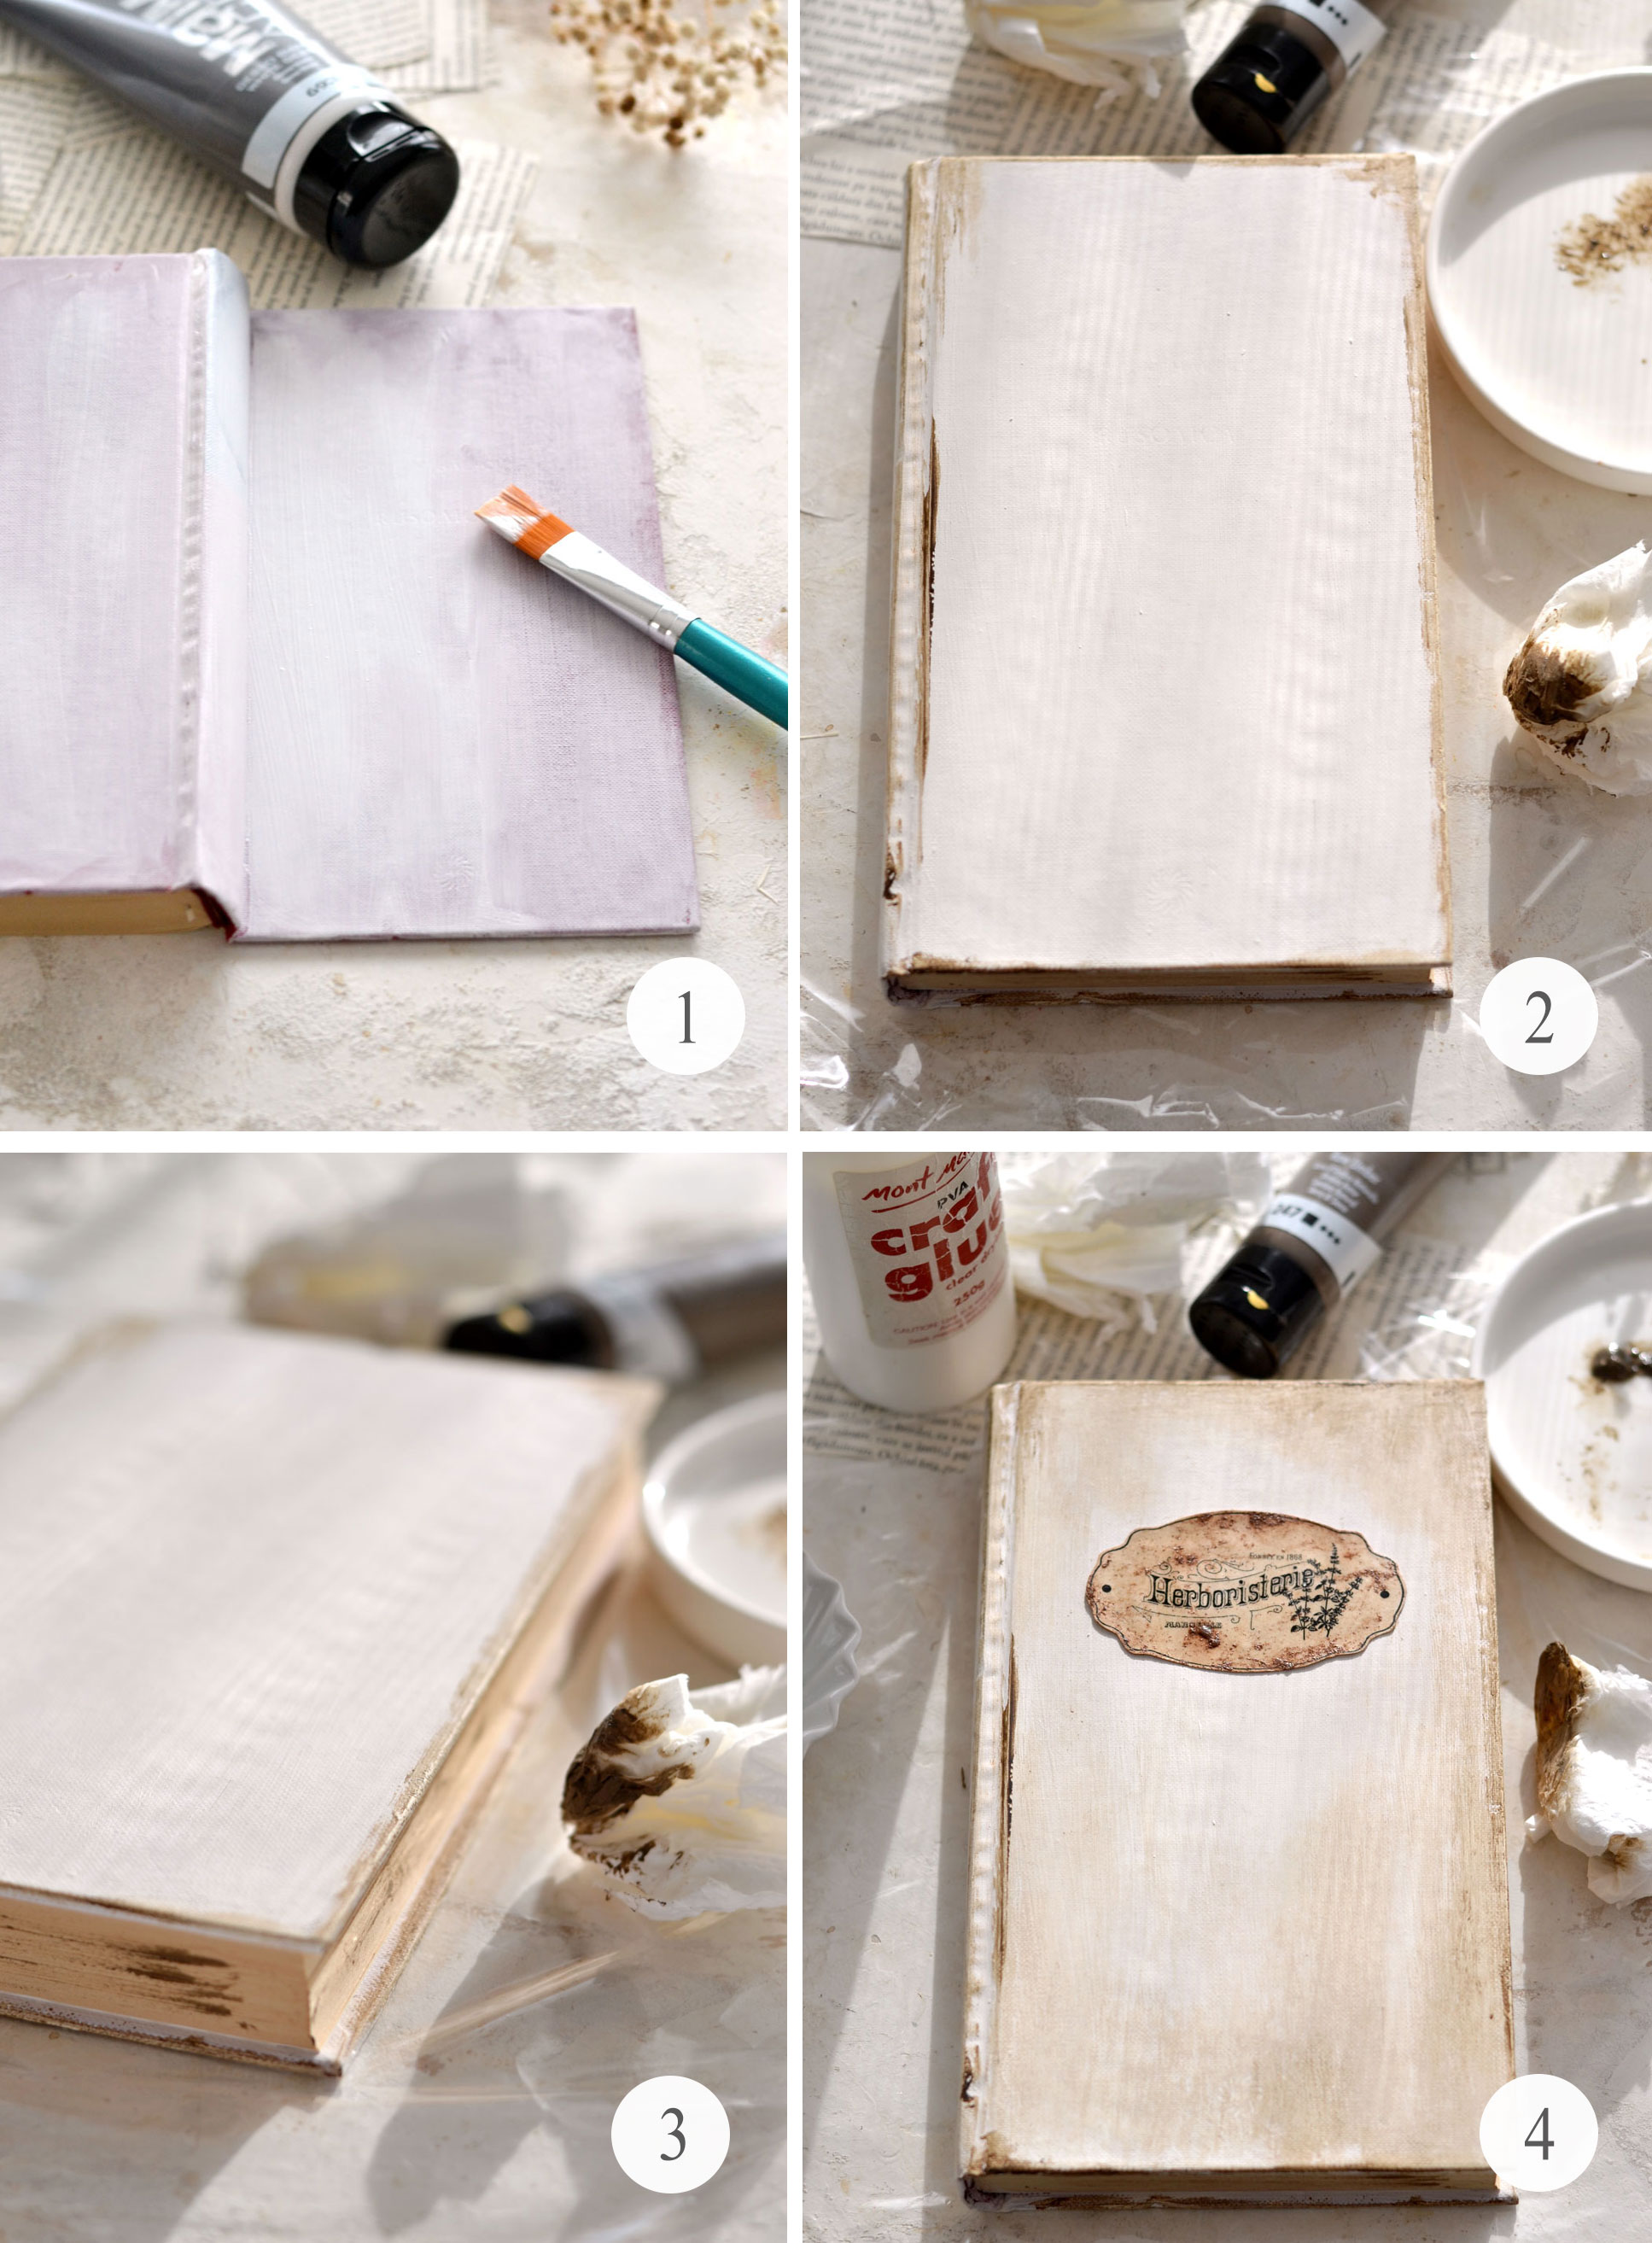 DIY Book Box - painting and distressing the exterior